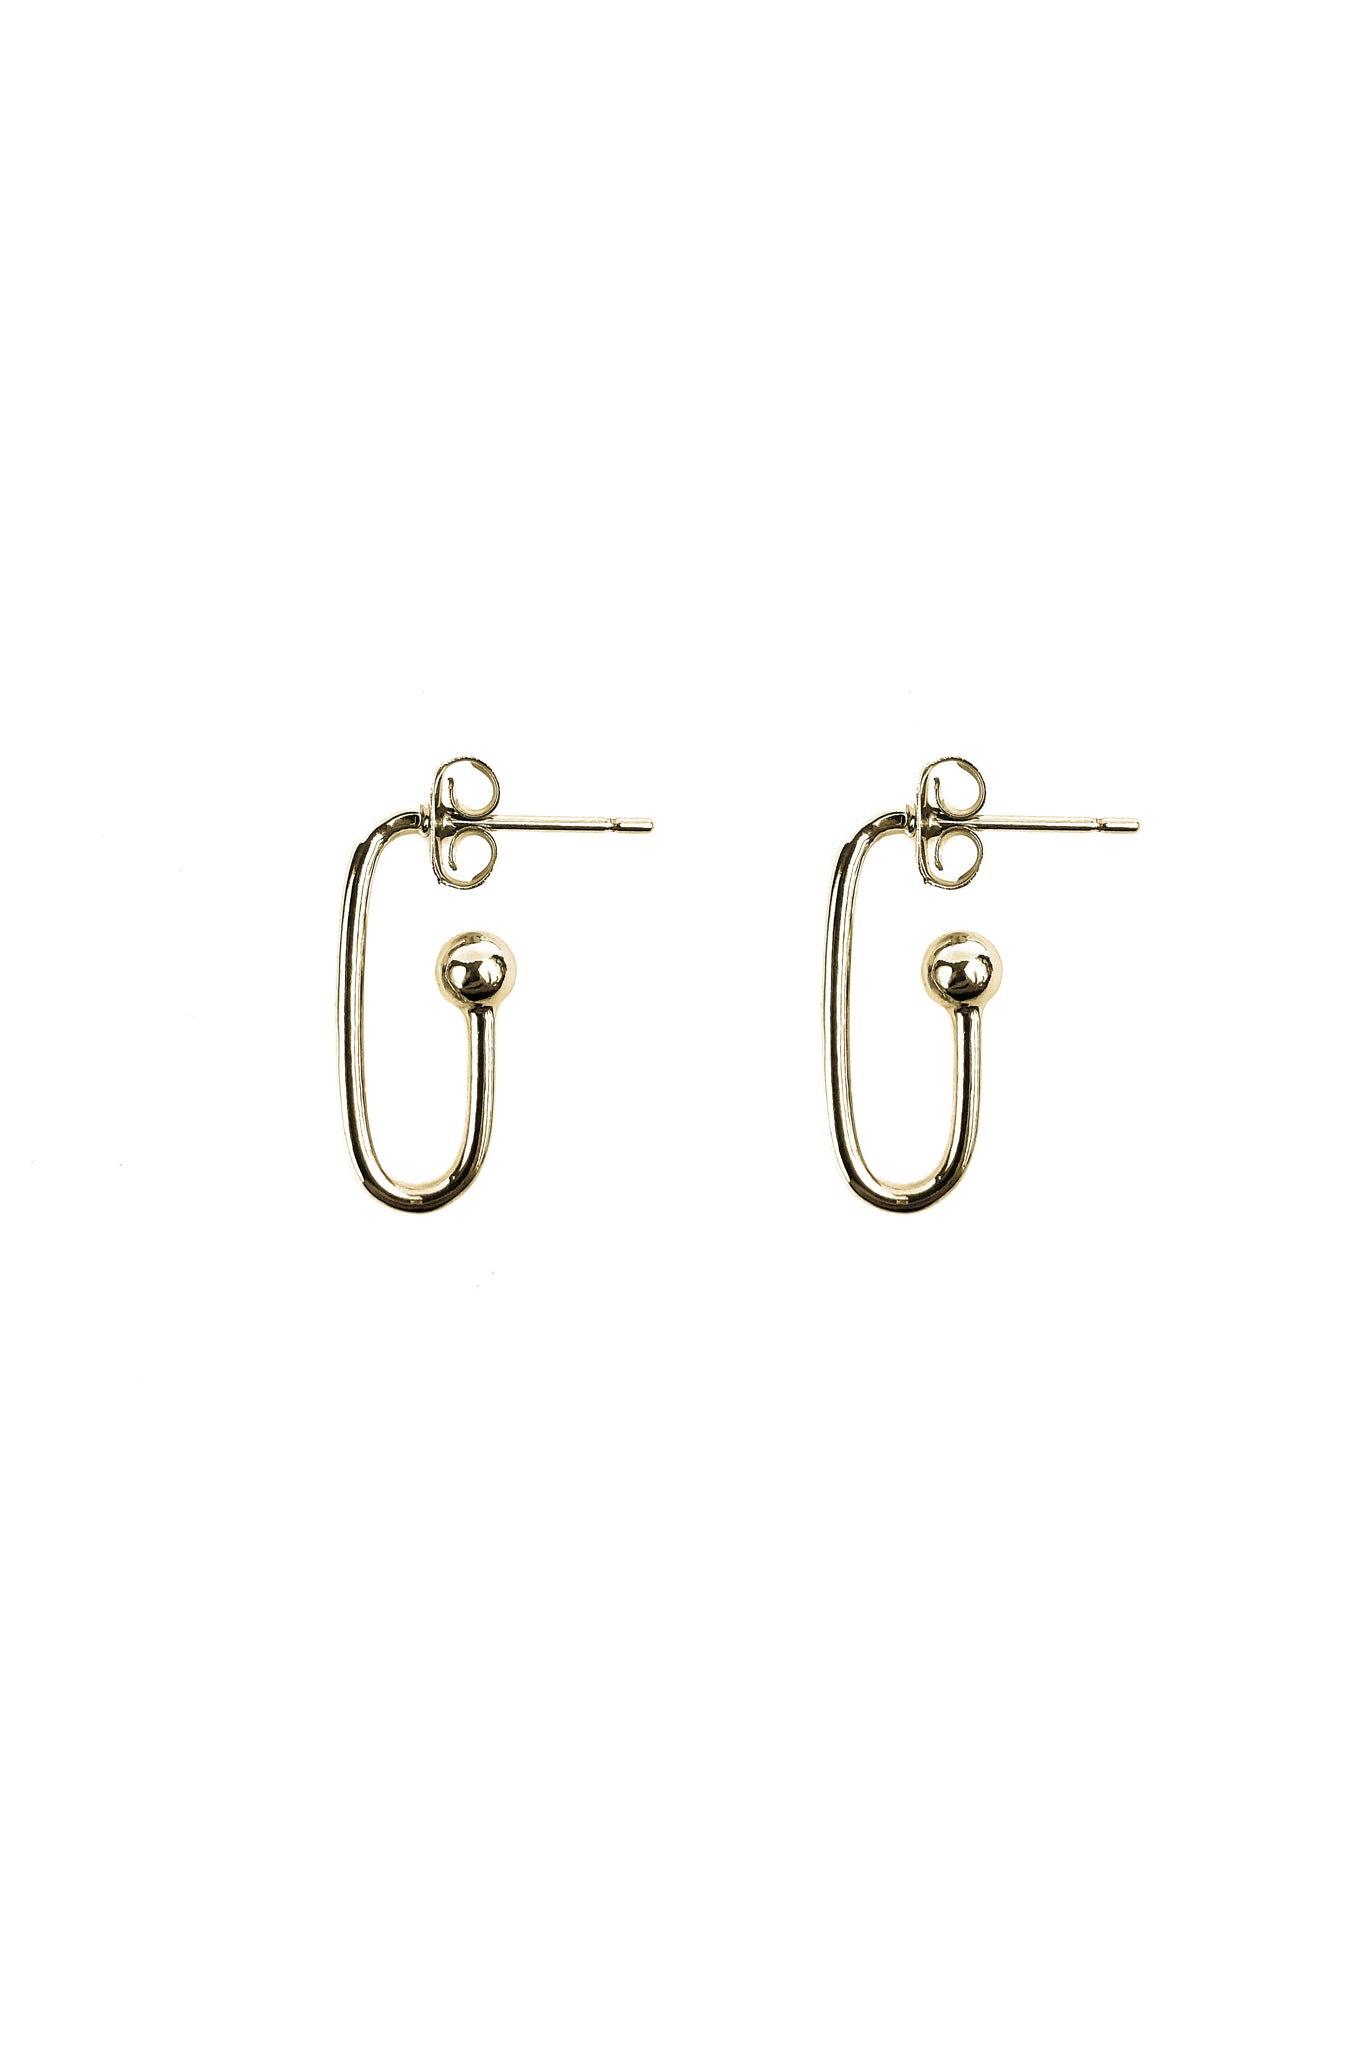 Justine Clenquet Blake Earrings, Gold